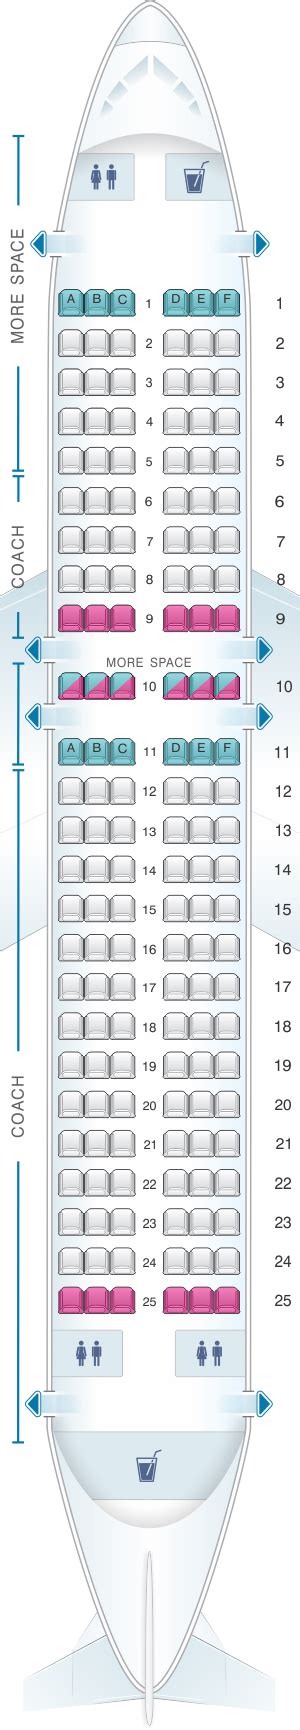 Jetblue plane seat layout. Things To Know About Jetblue plane seat layout. 